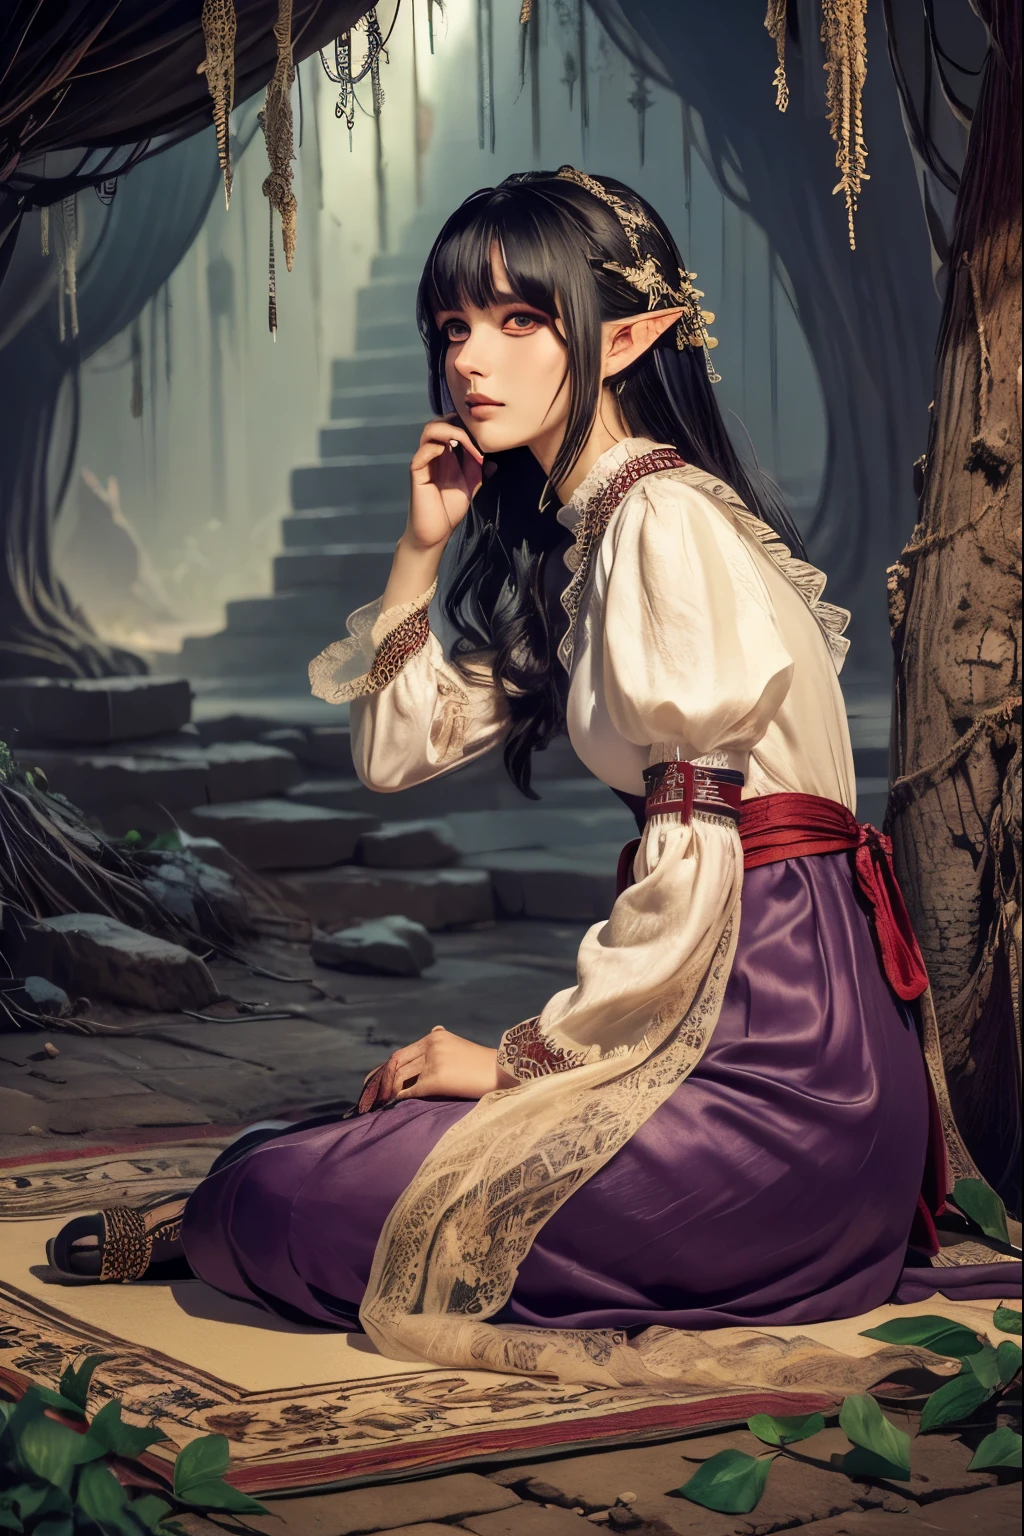 (Ultra-detailed face, looking away), (Fantasy Illustration with Gothic & Ukiyo-e & Comic Art), (1woman, 1cheetah:1.3), (A middle-aged dark elf woman with gray hair, blunt bangs, Very Very long disheveled hair, and dark purple skin, lavender eyes), (EdobCheetah:She is sitting on a rush mat in the shade of a scorching savanna tree, frolicking with a lone cheetah in a daring pose), BREAK (She wears a white linen garabia with red lace and silver ruffles, and blue-colored cotton sandals), BREAK (In the background is a desolate savanna lit by twinkling stars and a red moon)